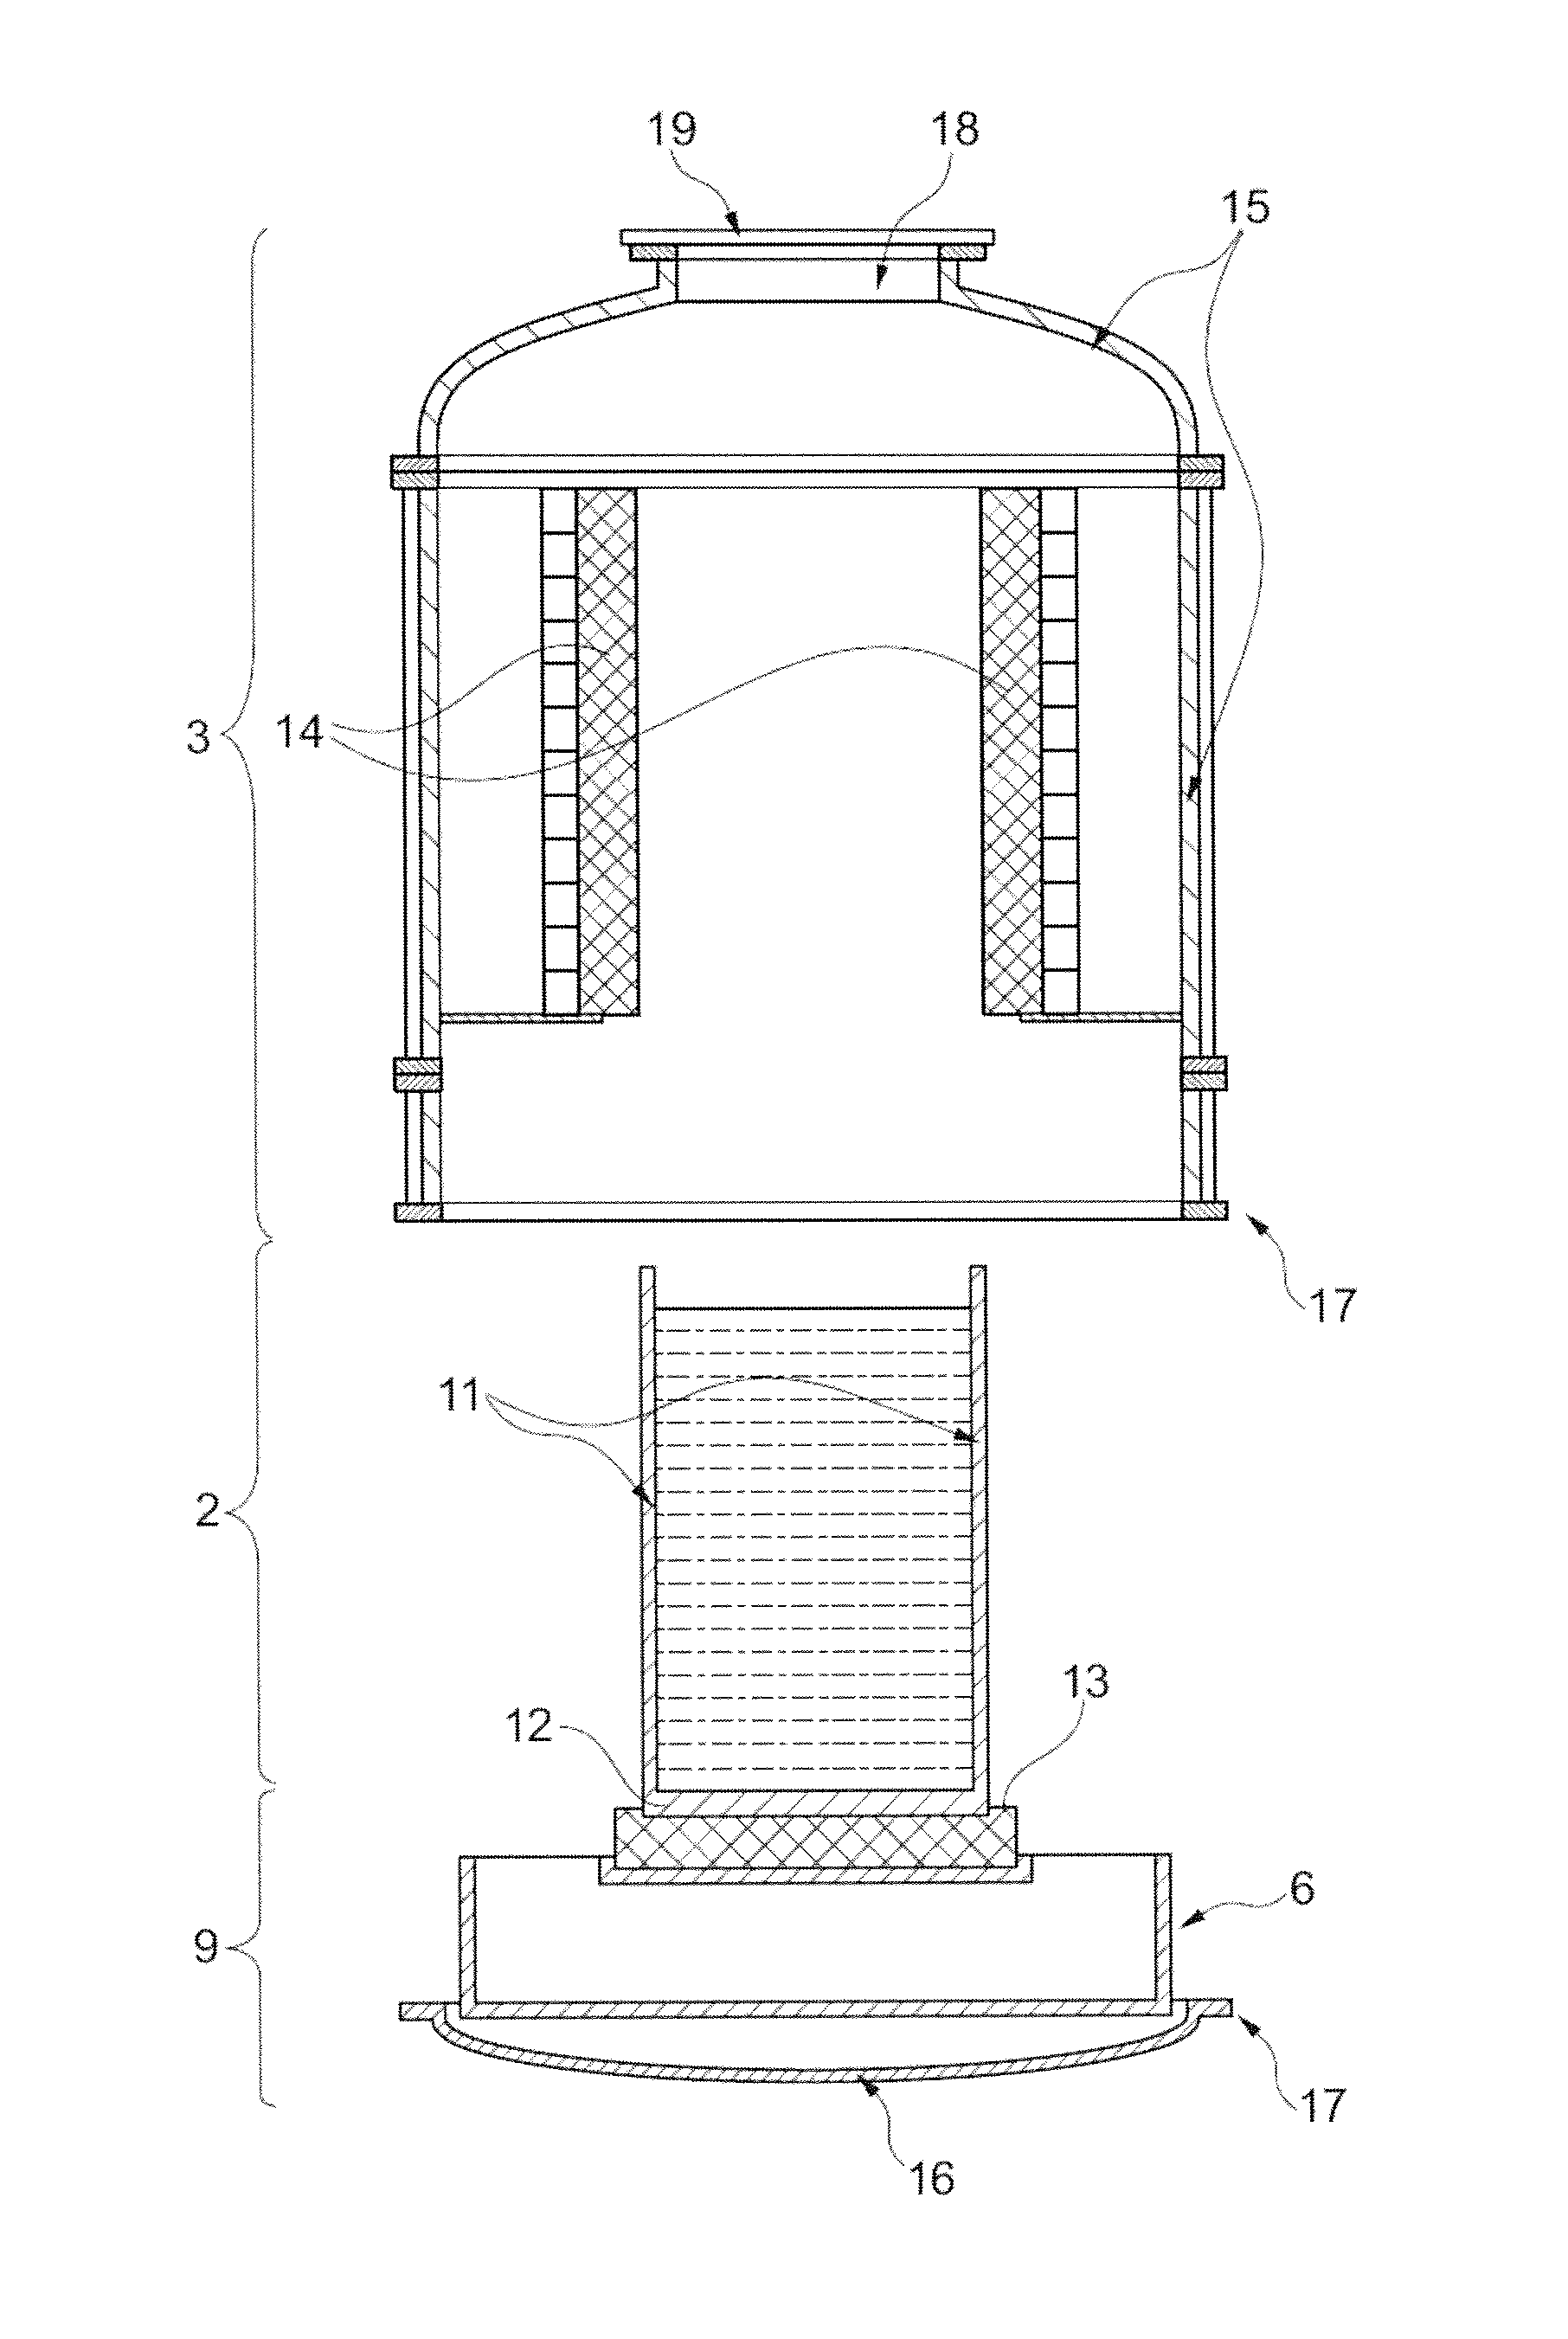 Melting device for consolidating contaminated scrap